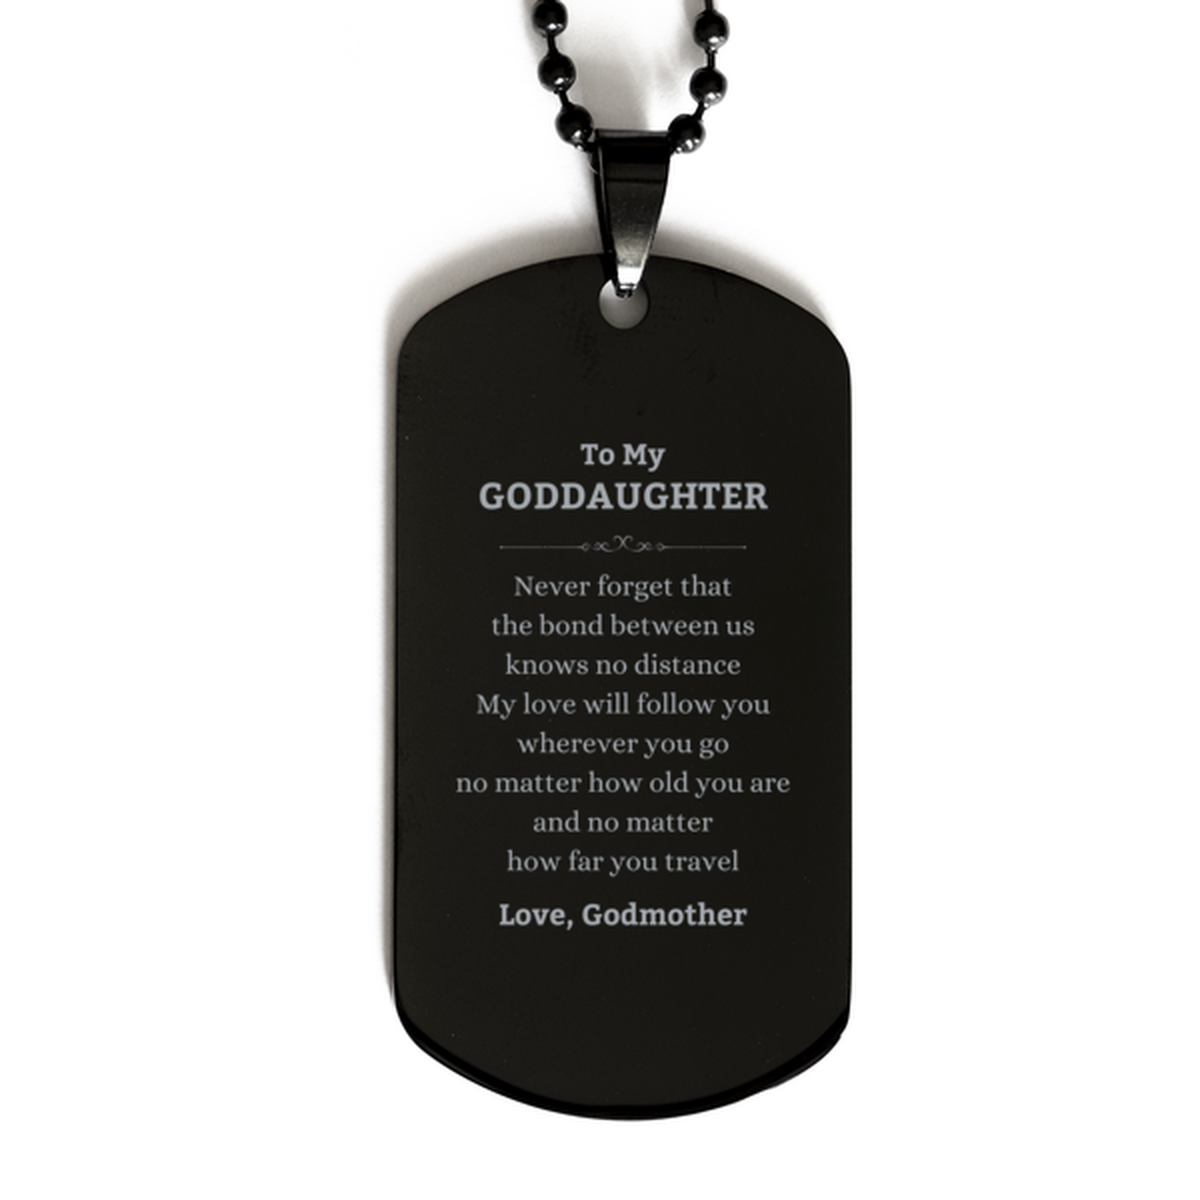 Goddaughter Birthday Gifts from Godmother, Adjustable Black Dog Tag for Goddaughter Christmas Graduation Unique Gifts Goddaughter Never forget that the bond between us knows no distance. Love, Godmother